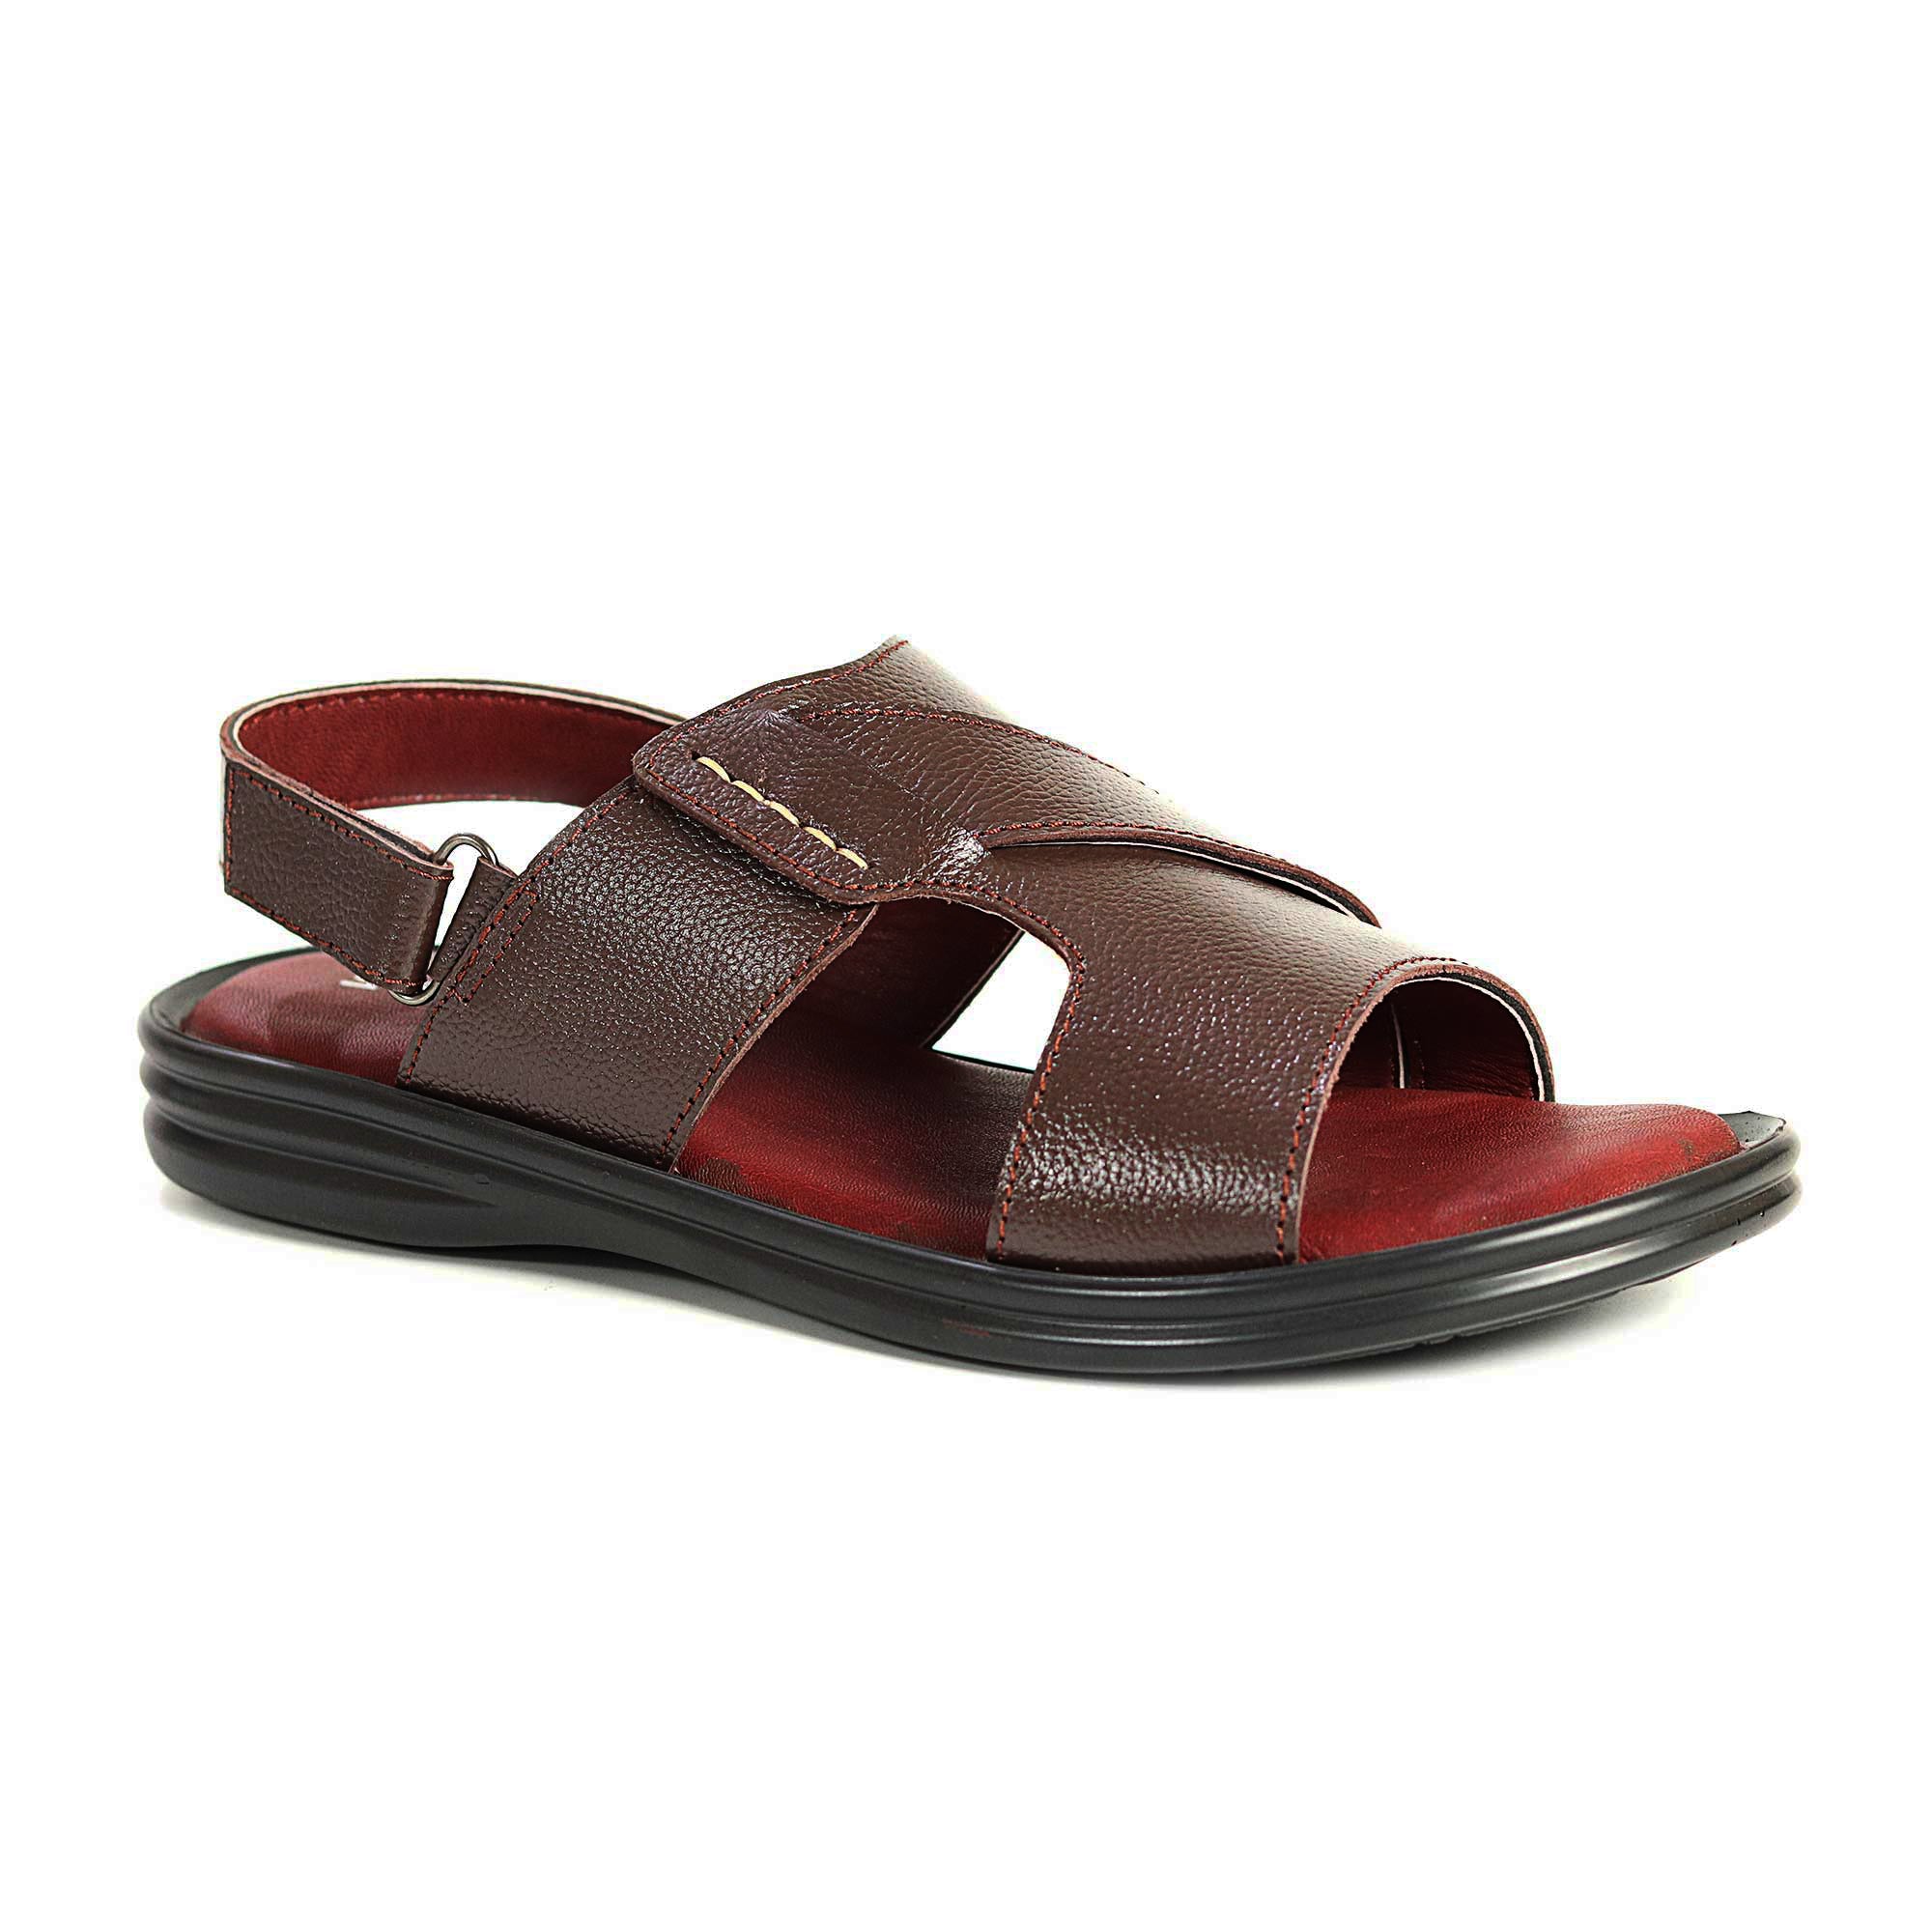 Zays Leather Sandal For Men (Chocolate) - AD69